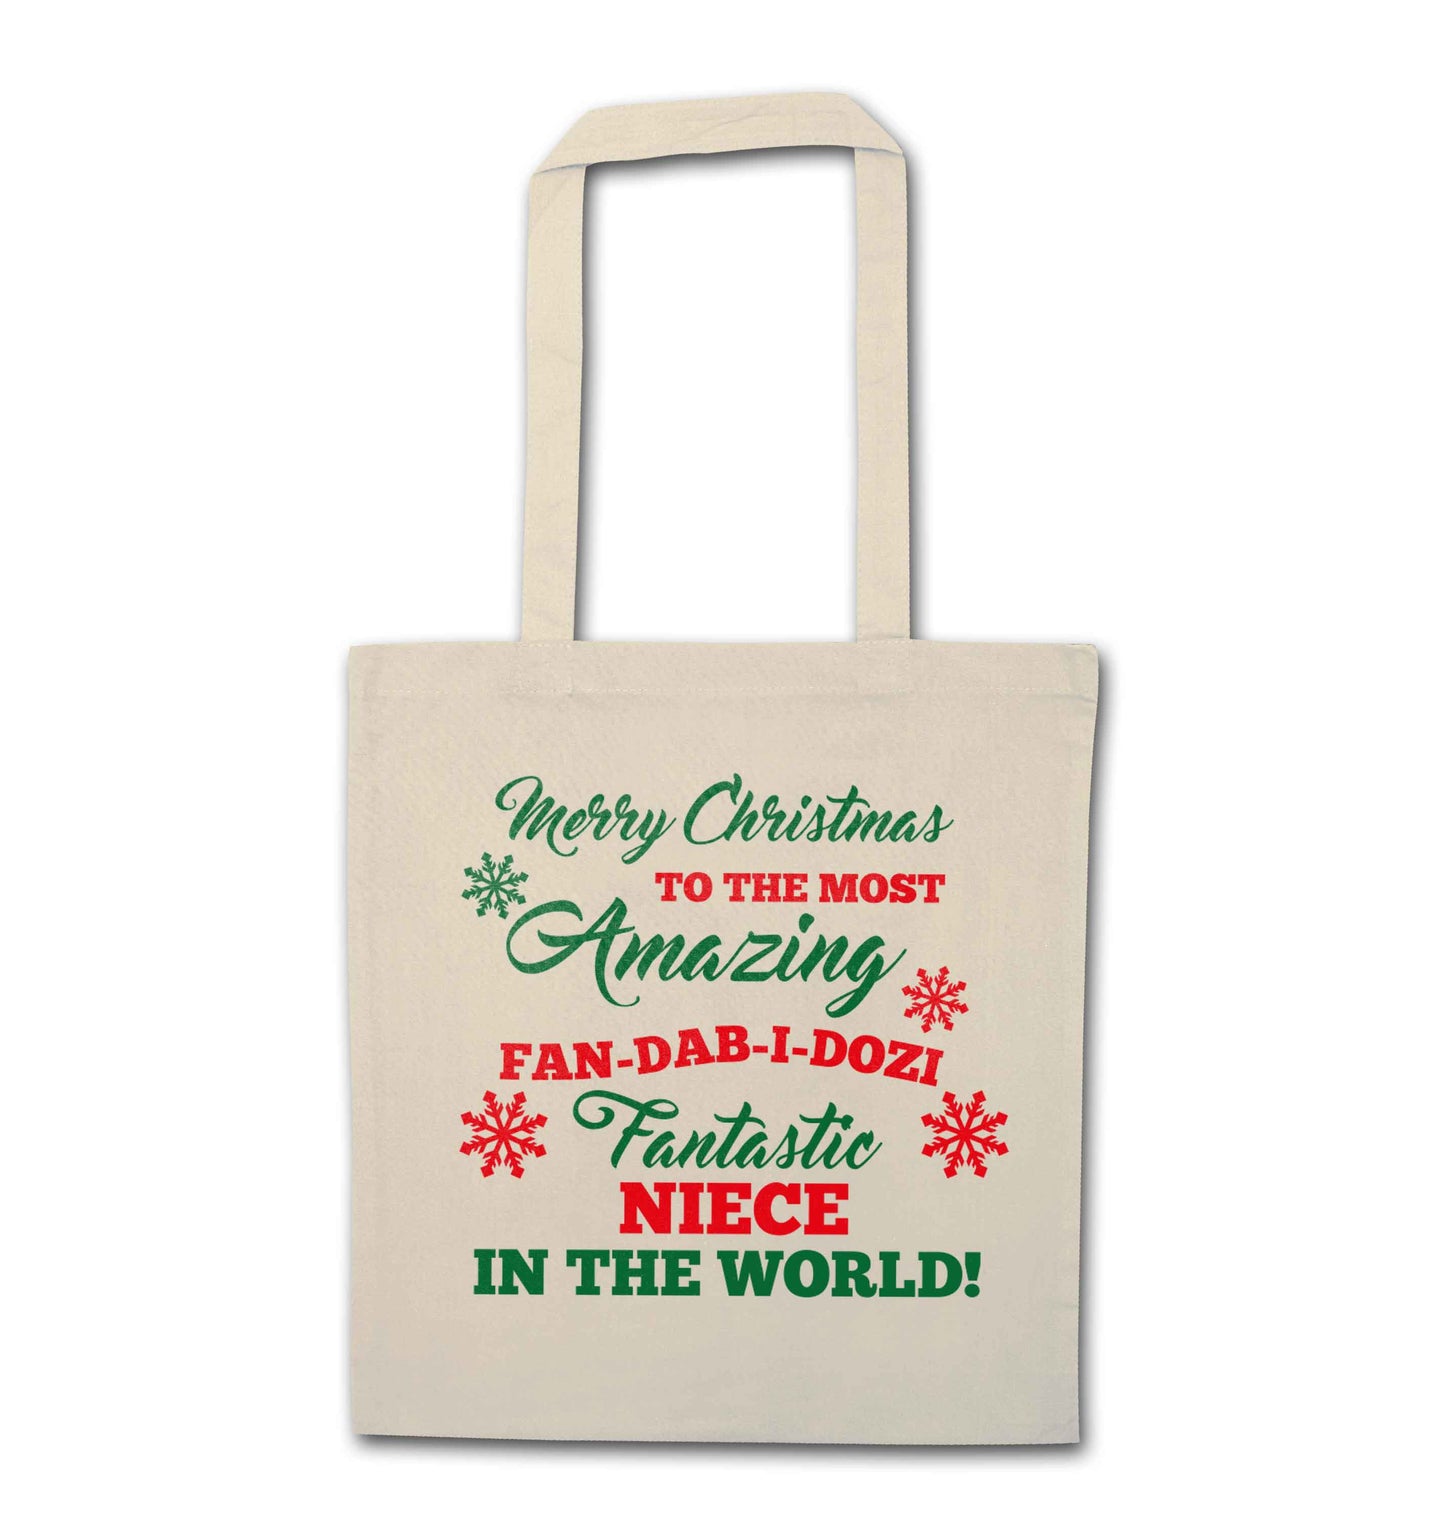 Merry Christmas to the most amazing fan-dab-i-dozi fantasic Niece in the world natural tote bag